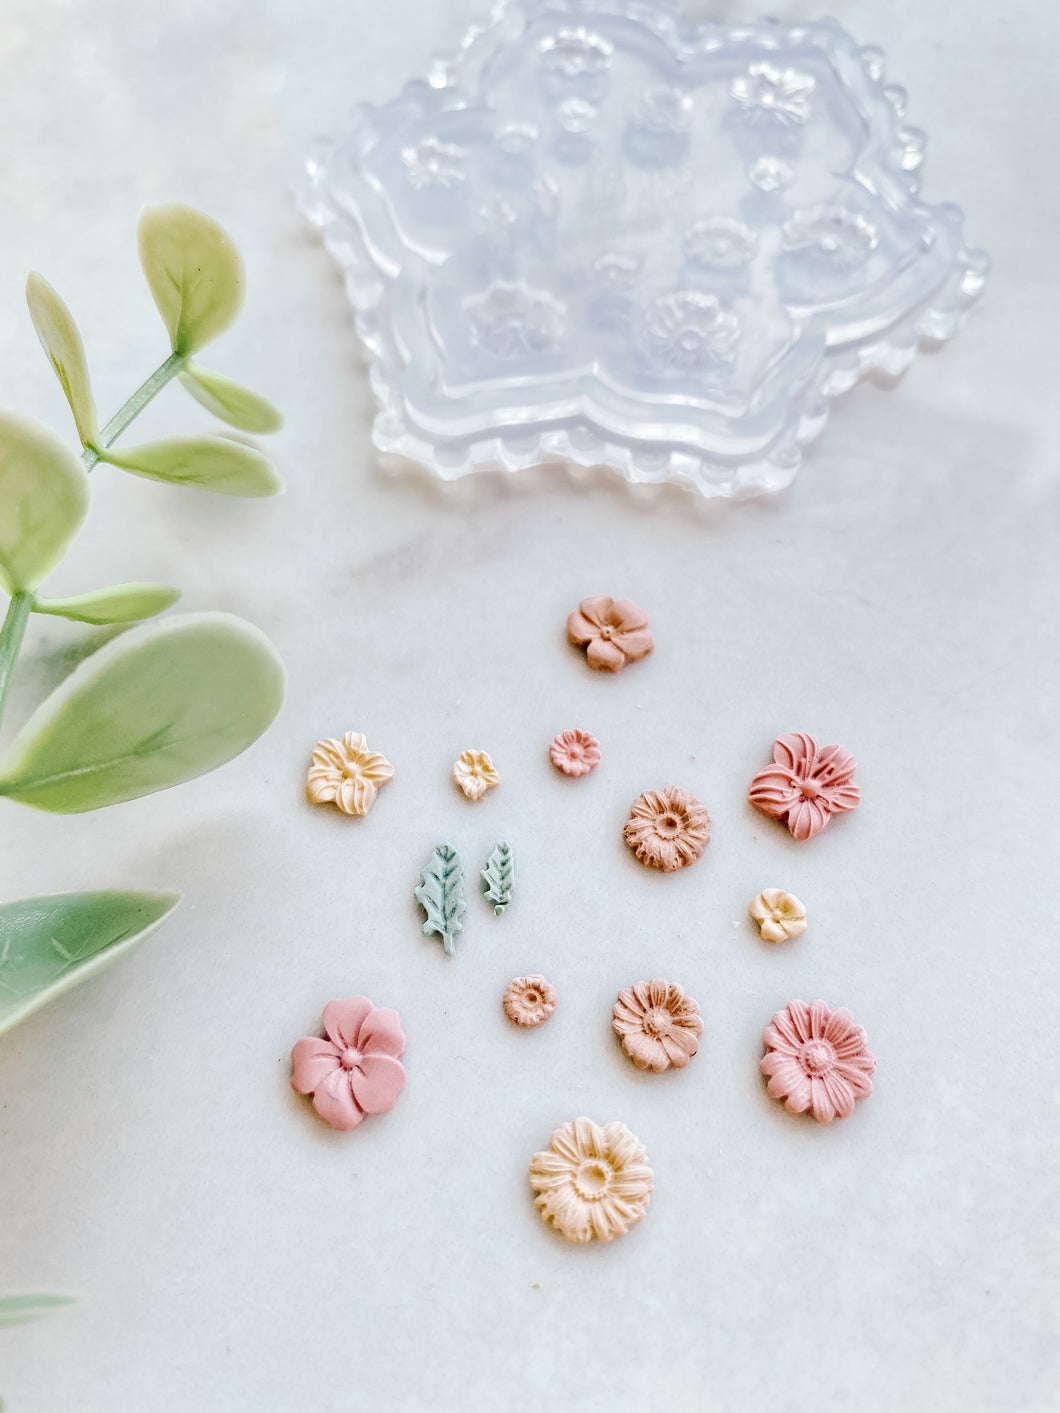 Micro Floral Mold 01